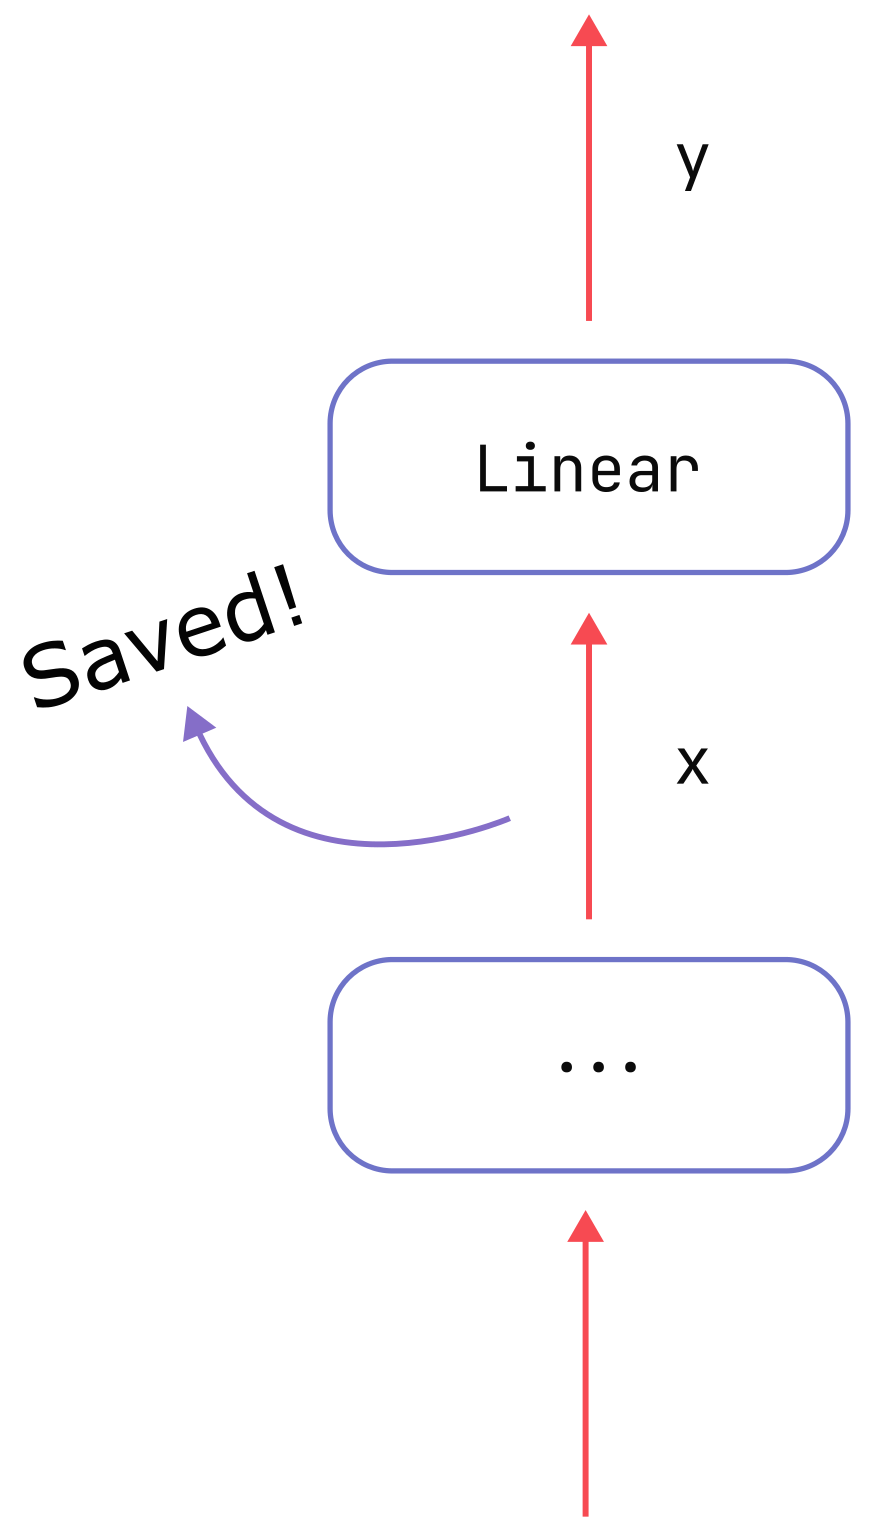 Activation memory from a linear layer.